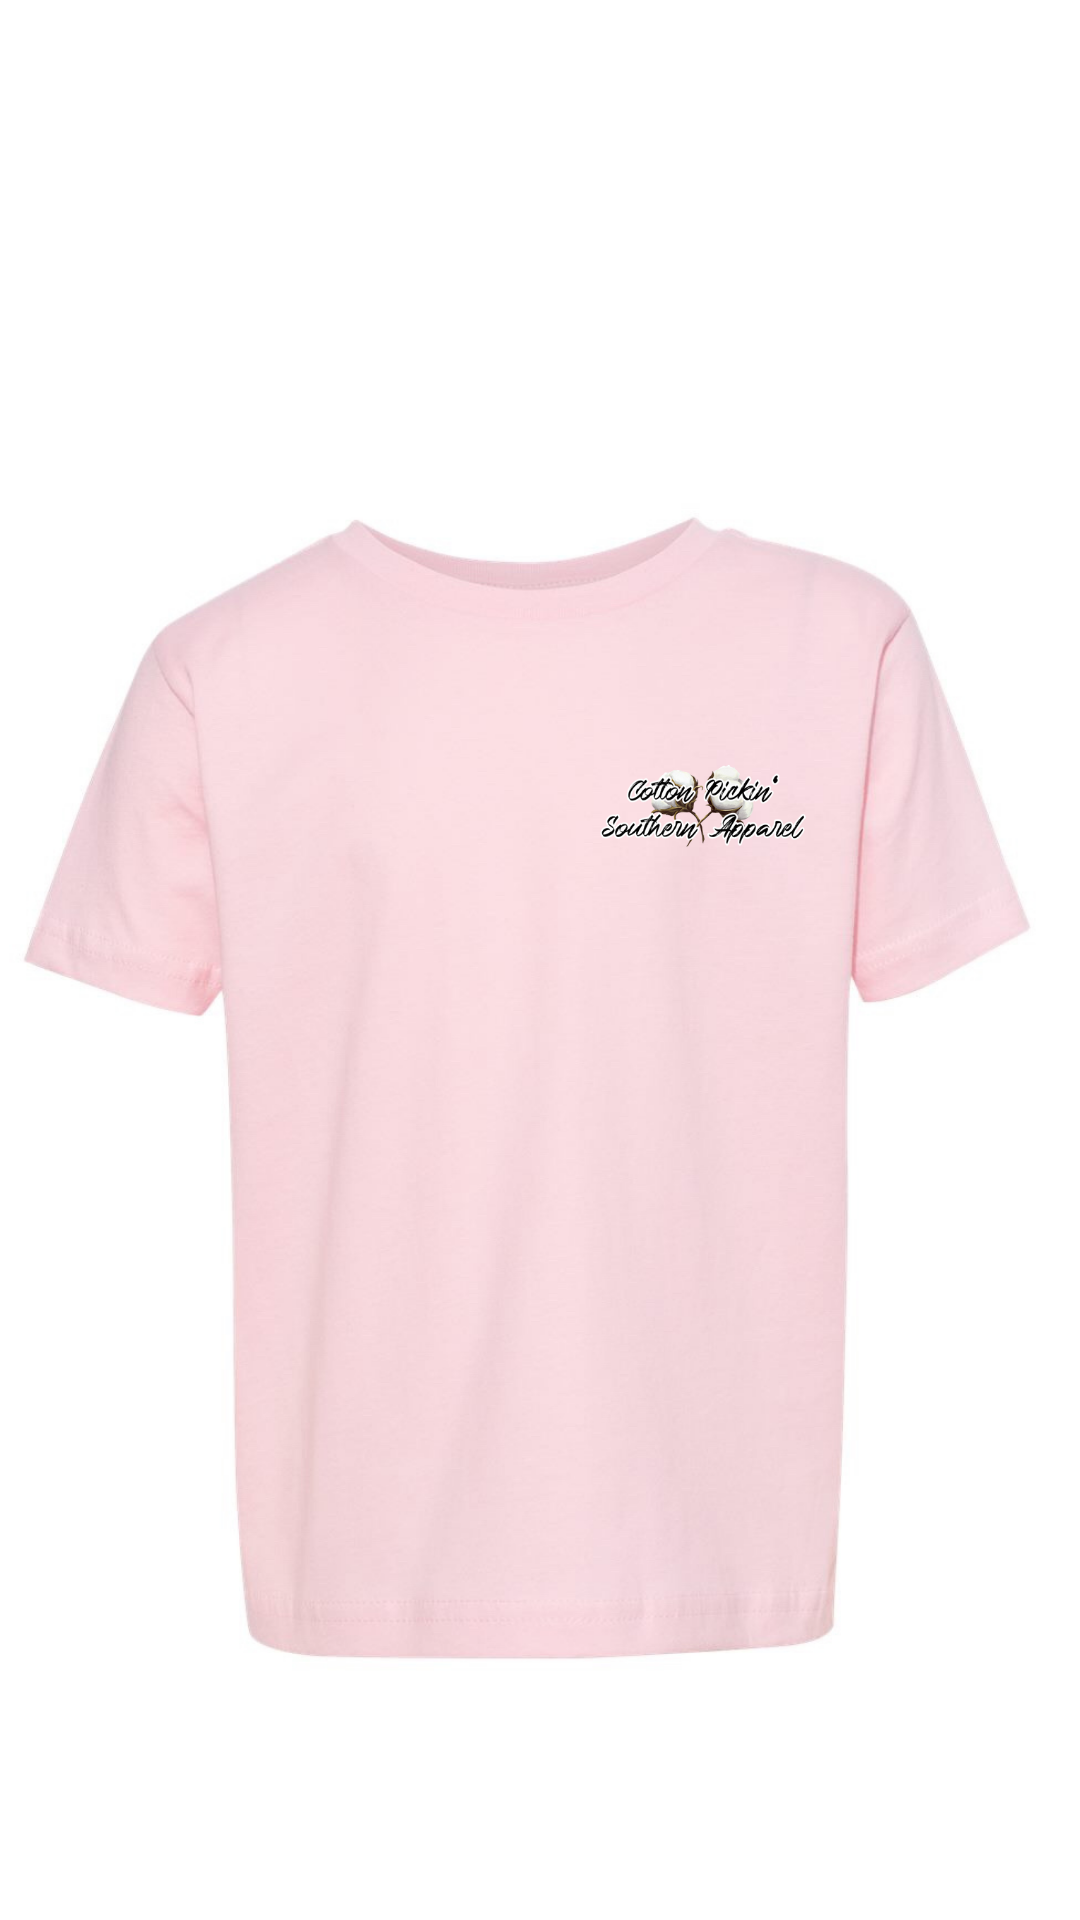 Cotton Pickin’ Blessed Cotton Pickin’ Southern Apparel